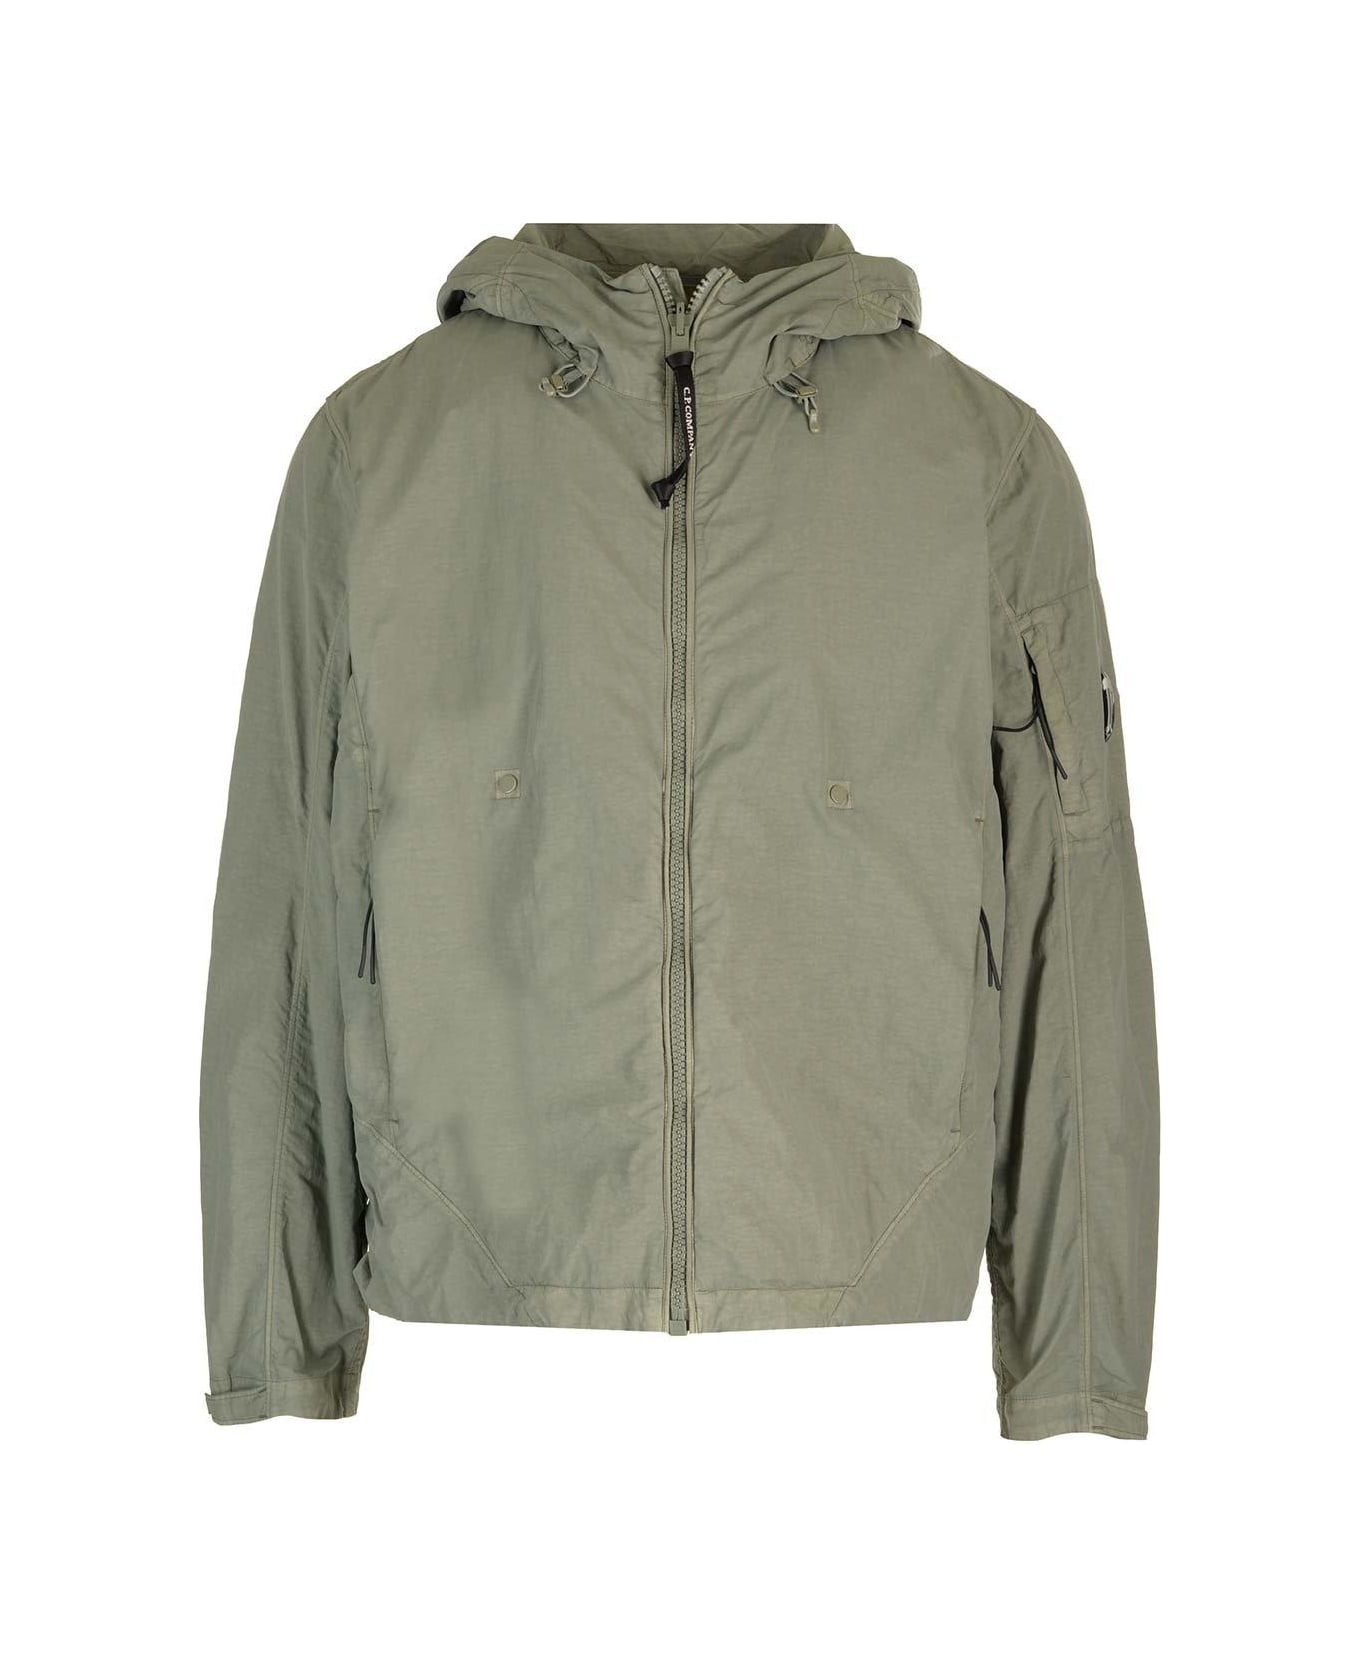 C.P. Company Reversible Hooded Jacket - Agave